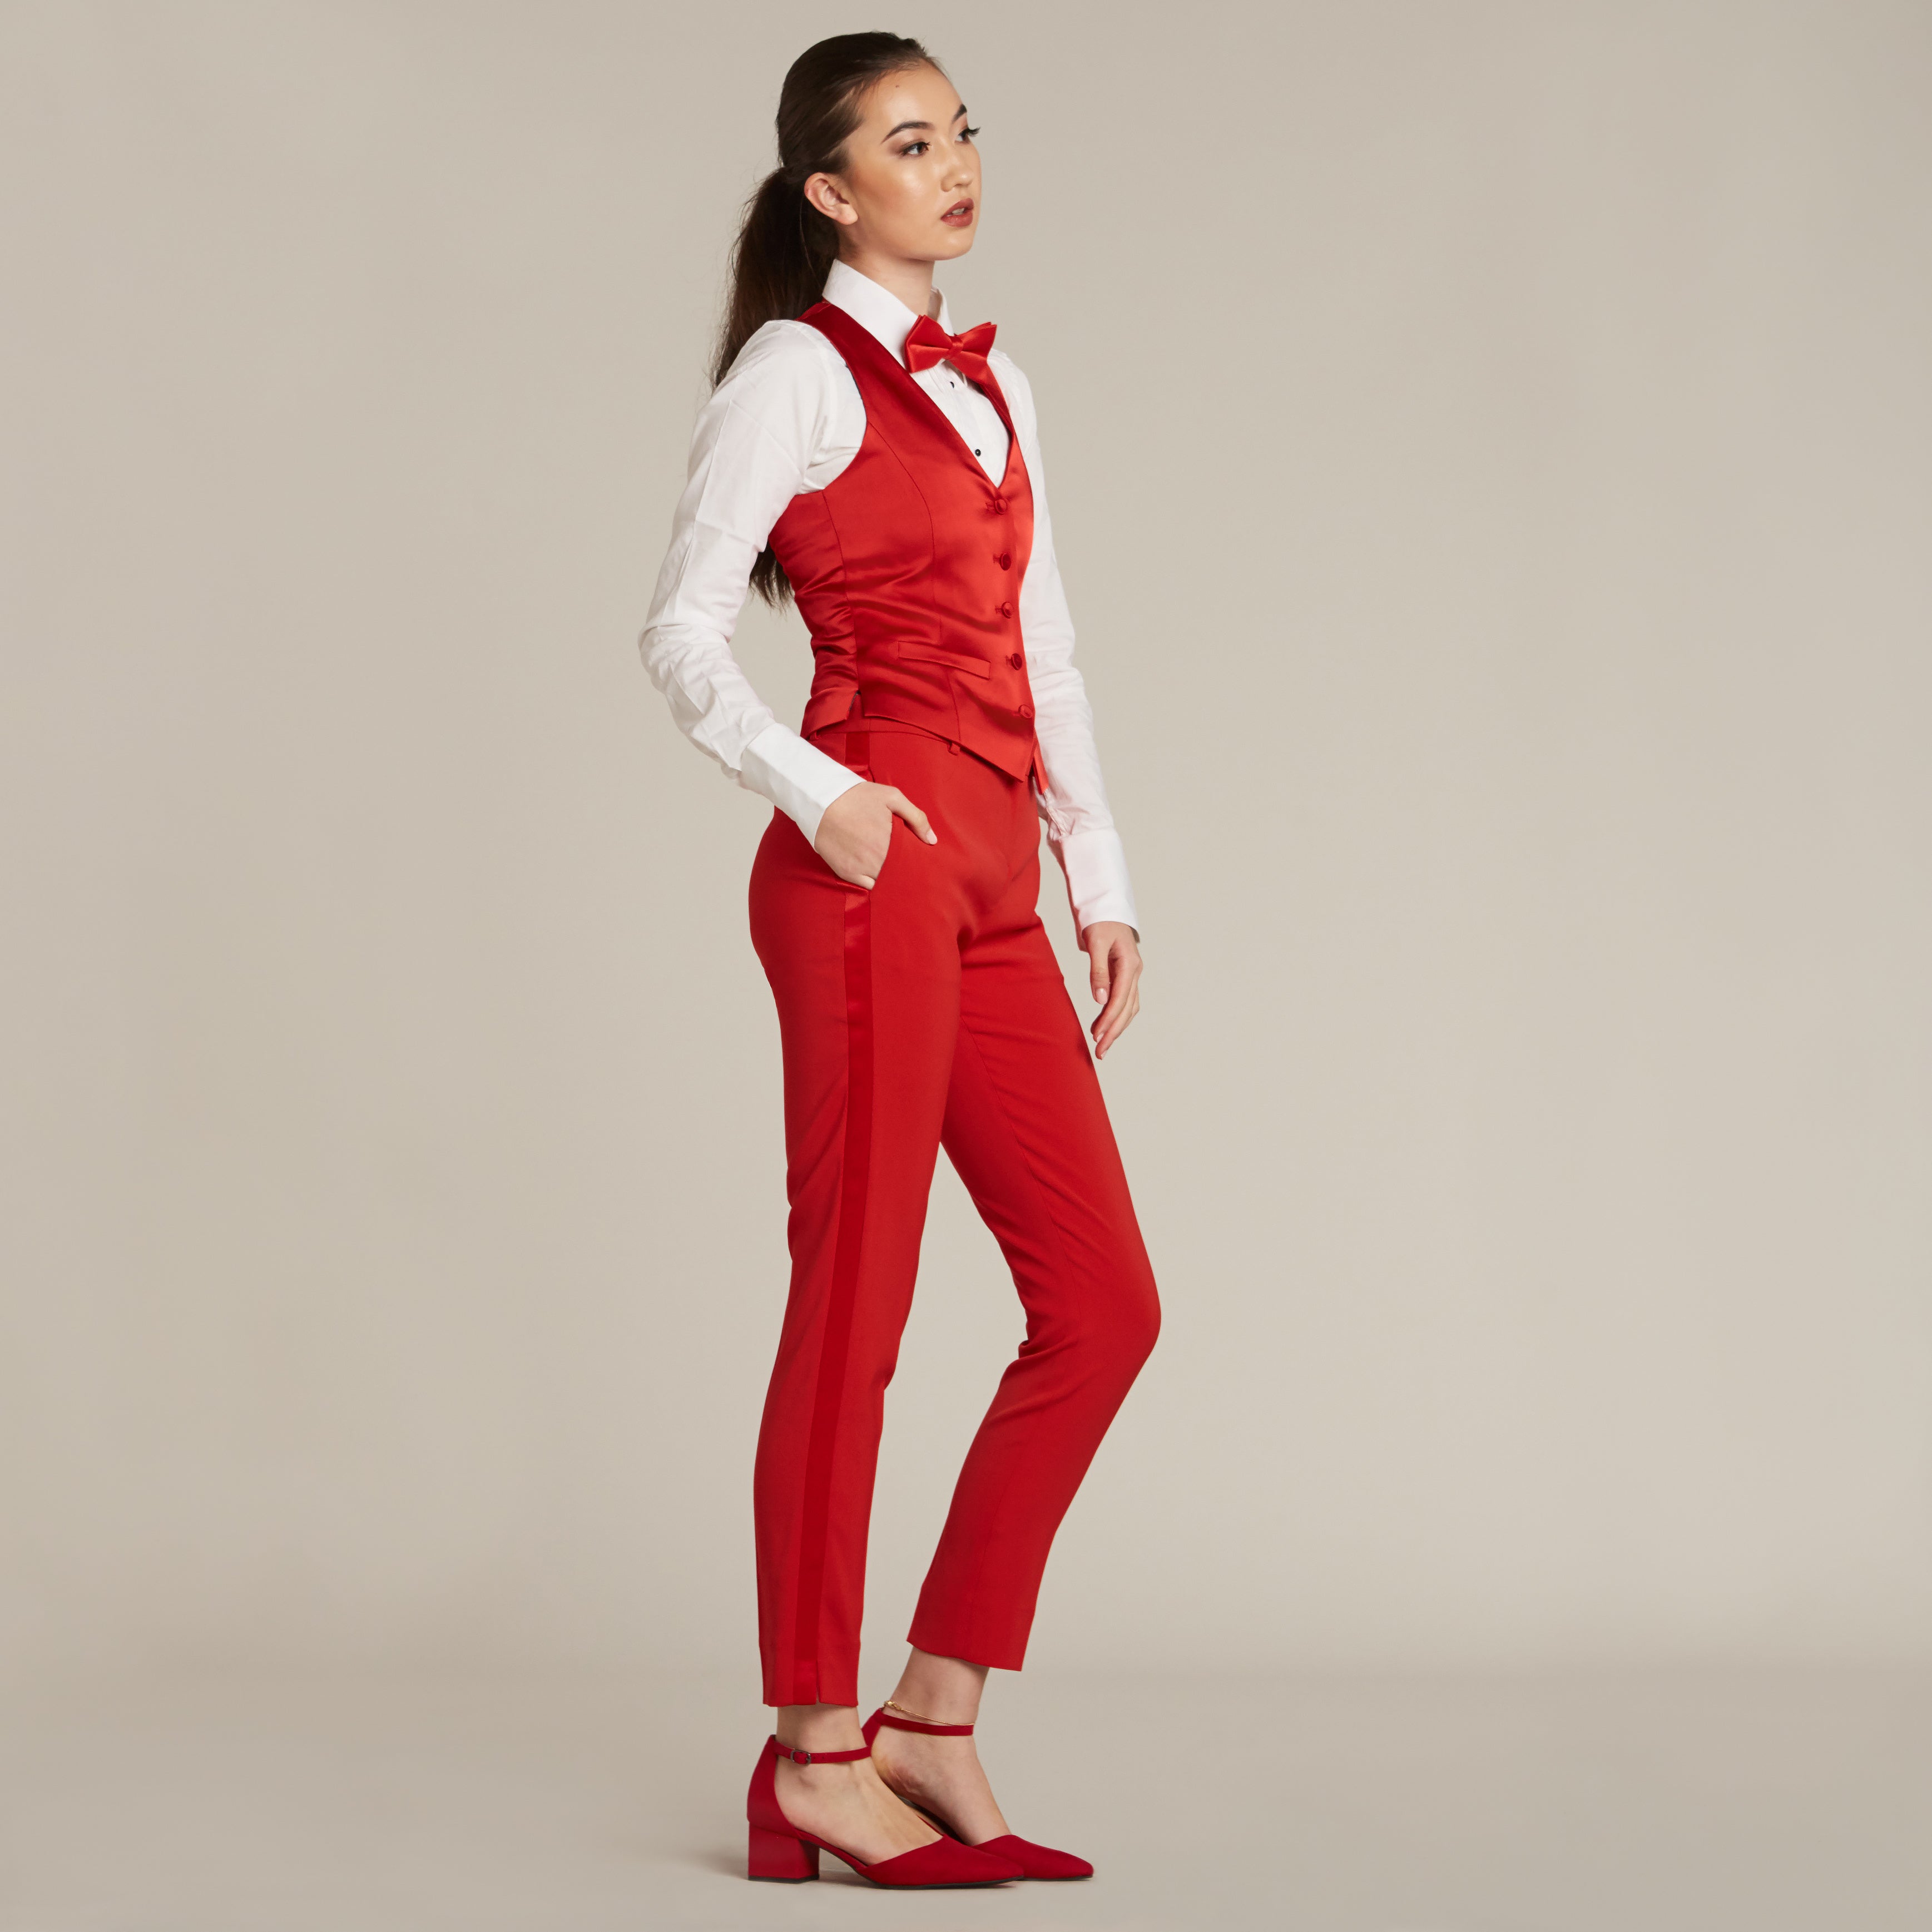 Top more than 139 slim suit for ladies latest